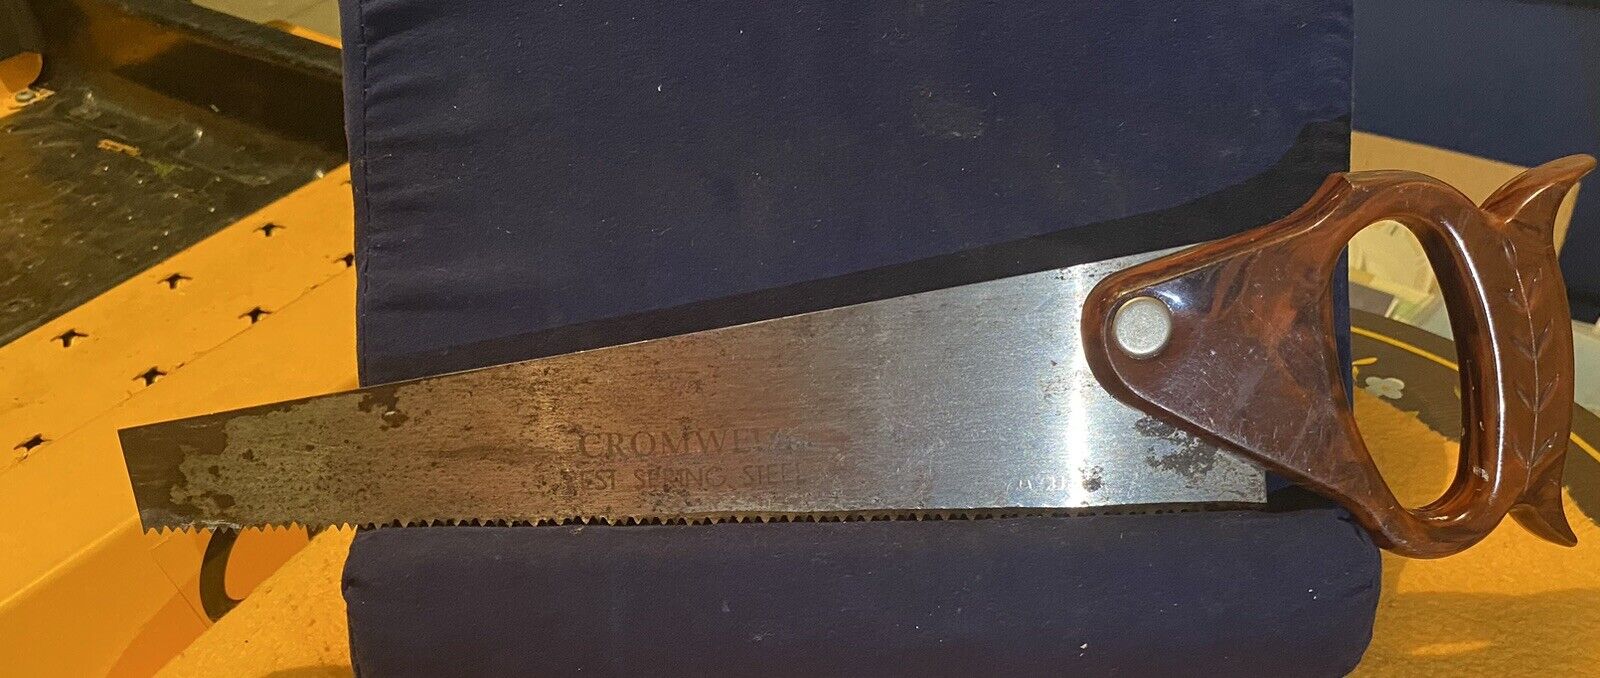 Vintage Cromwell Best Spring Steel 12” Saw Made In west Germany